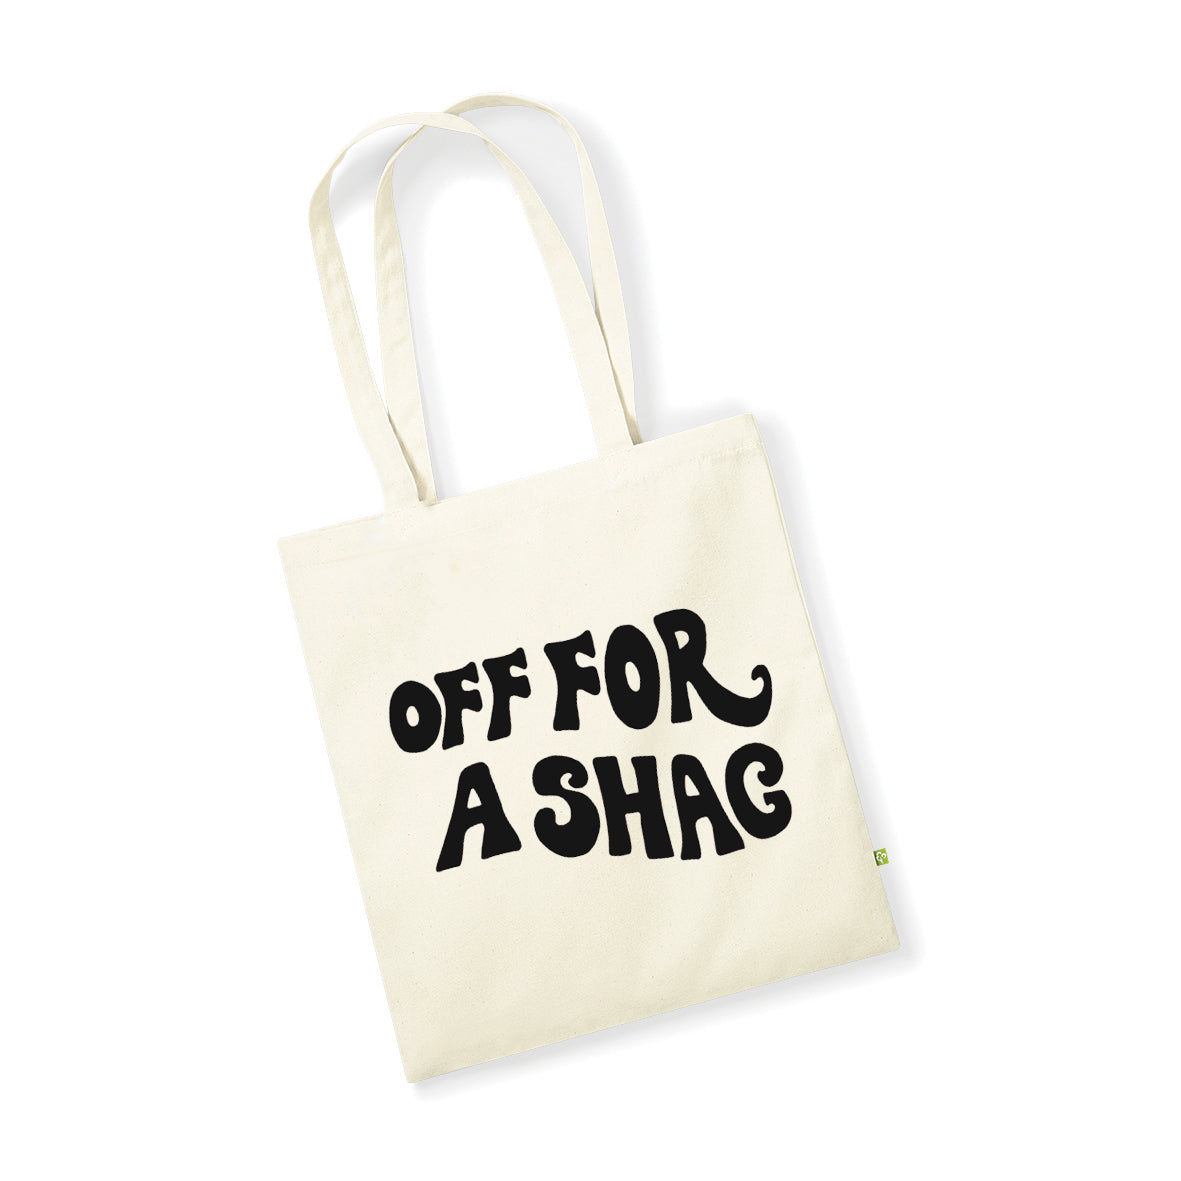 Off For A Shag - Tote Bag - Florence Given